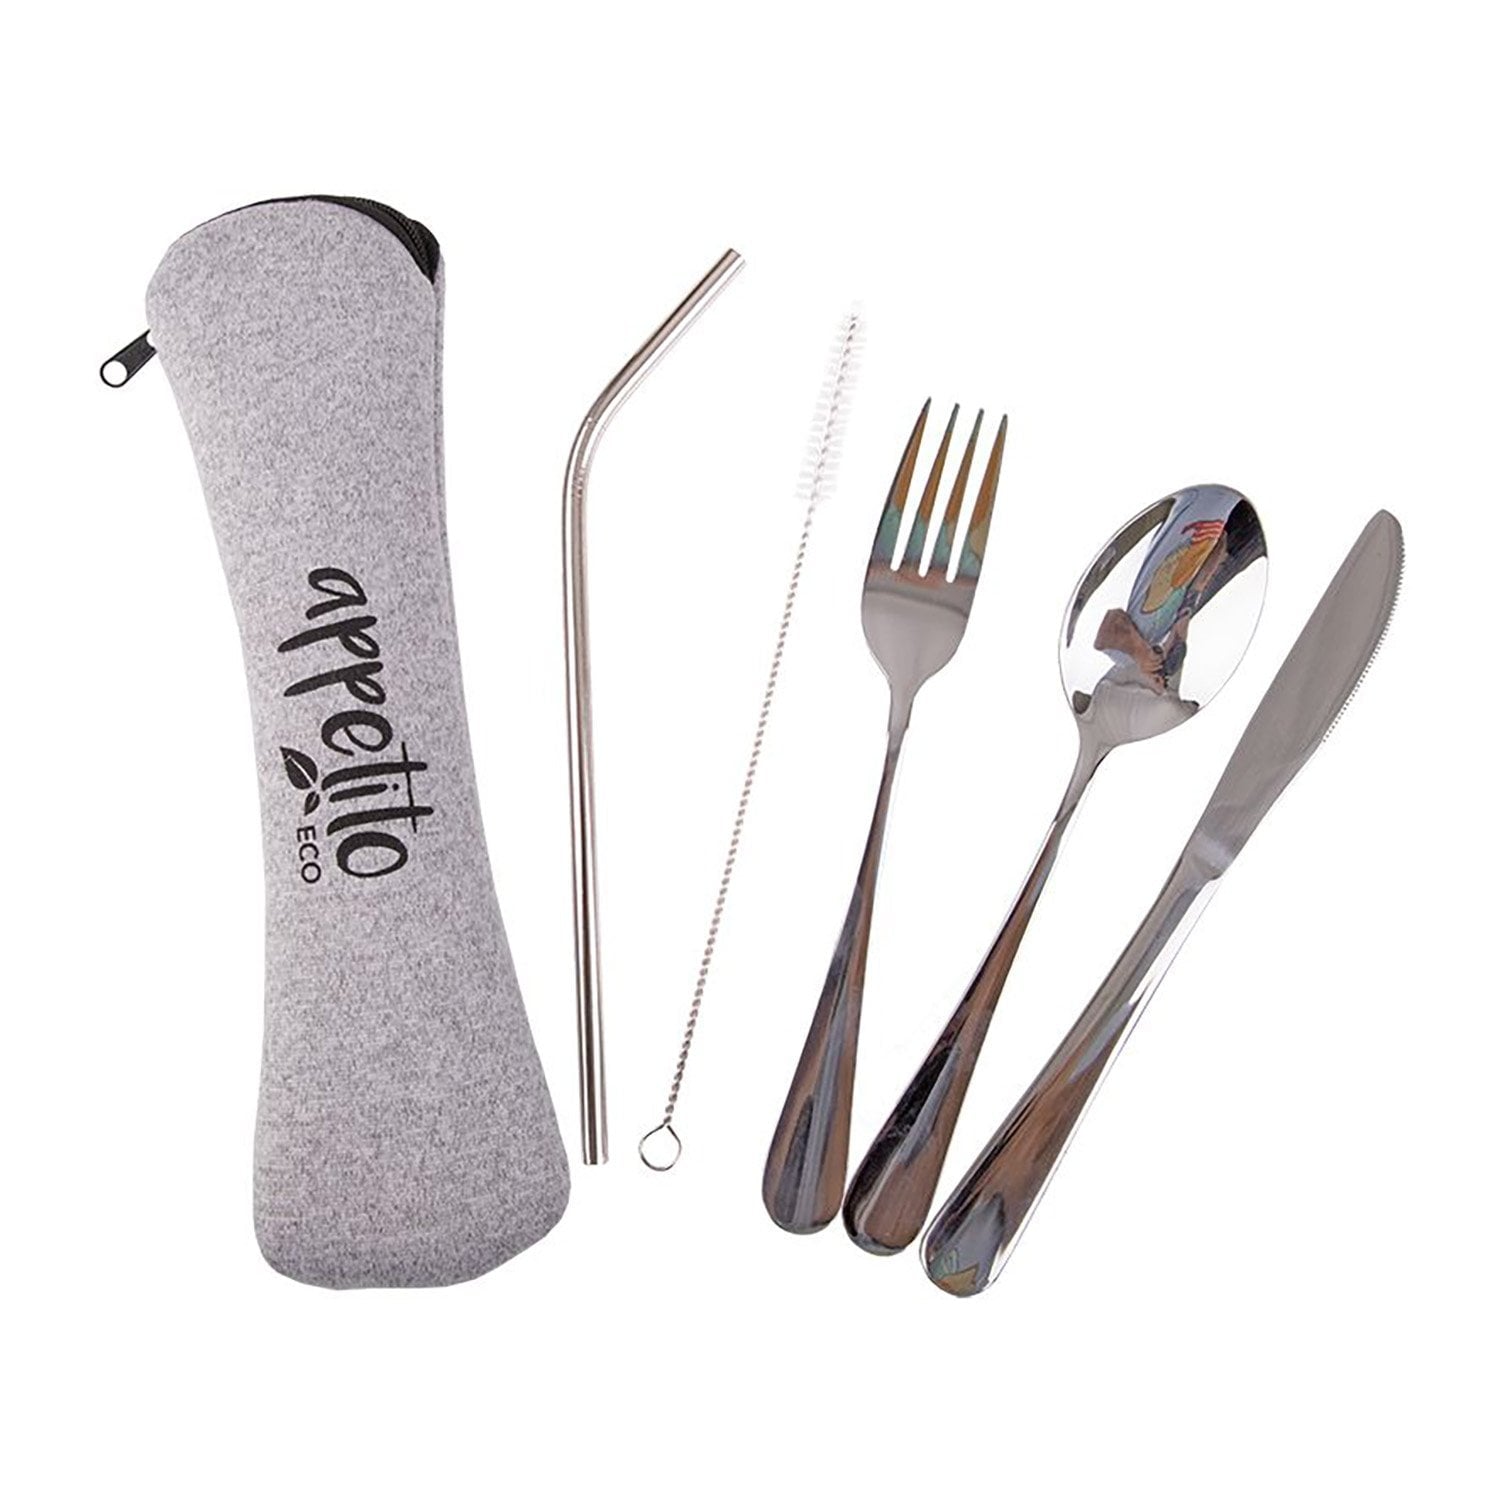 https://cdn.shopify.com/s/files/1/1416/1268/products/appetito-stainless-steel-traveller-s-5-piece-cutlery-set-29762873098434.jpg?v=1648201916&width=1500